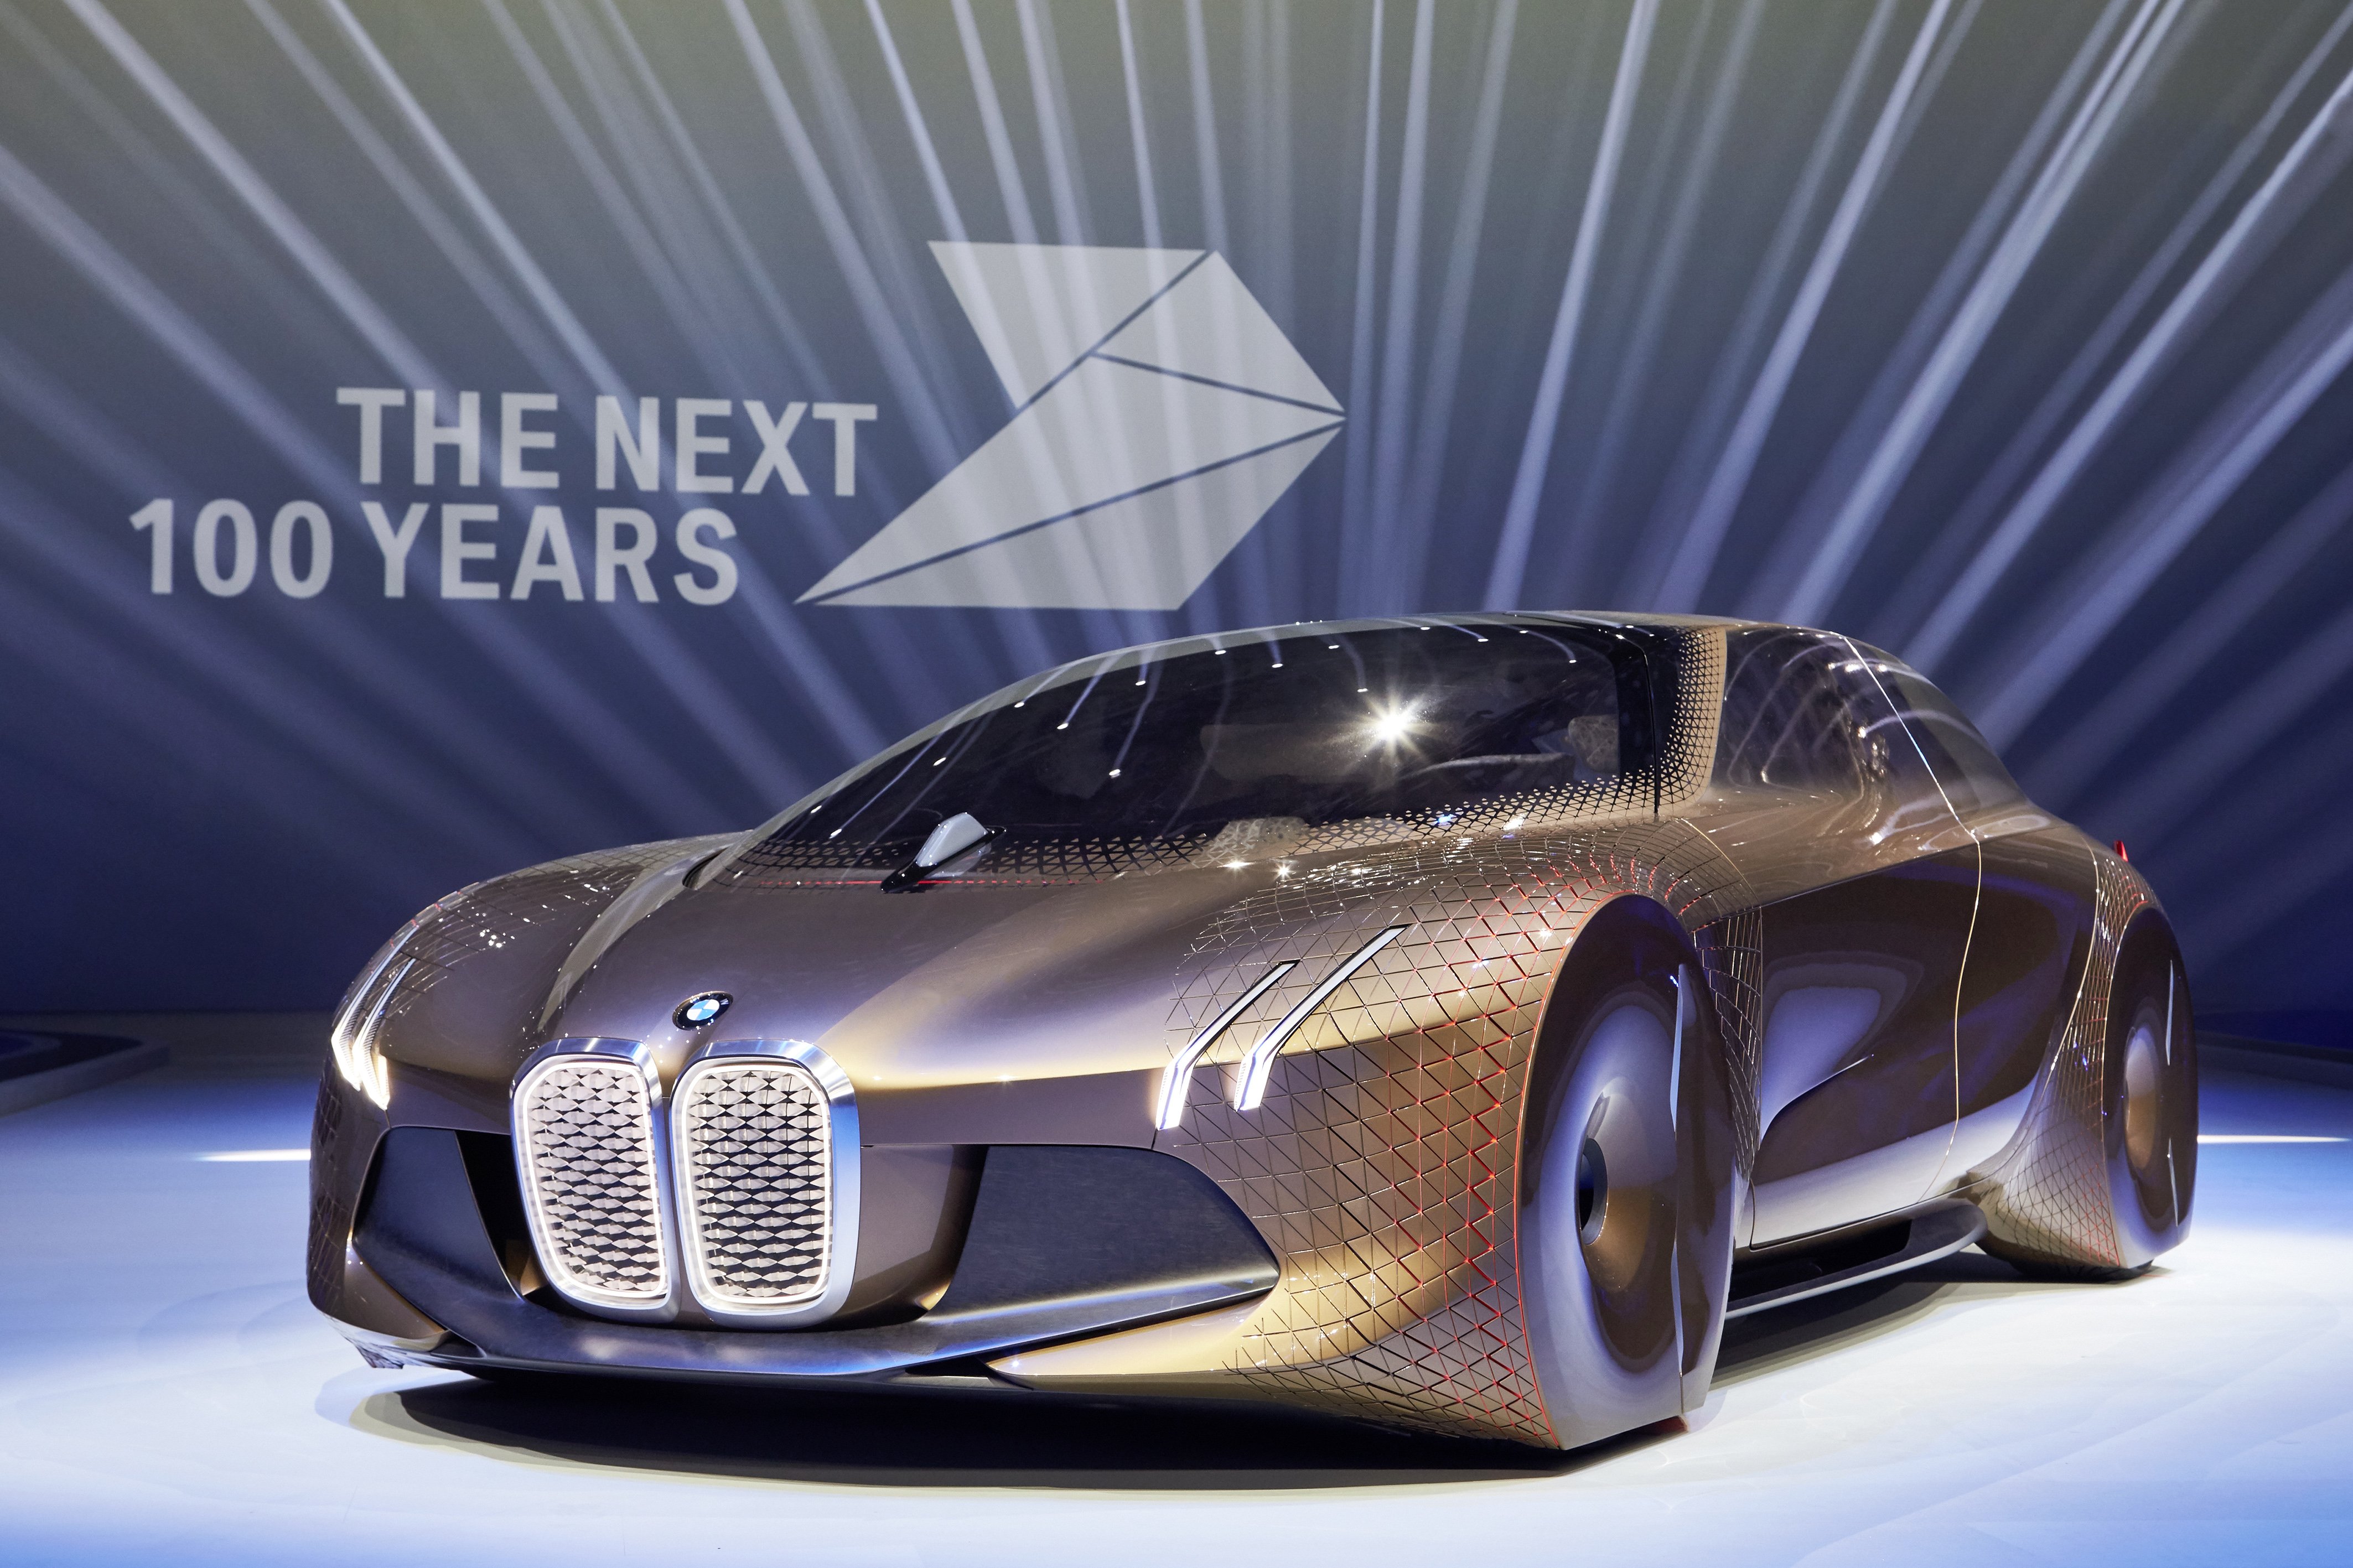 The wheels on BMW's new concept car are nothing like we've ever seen